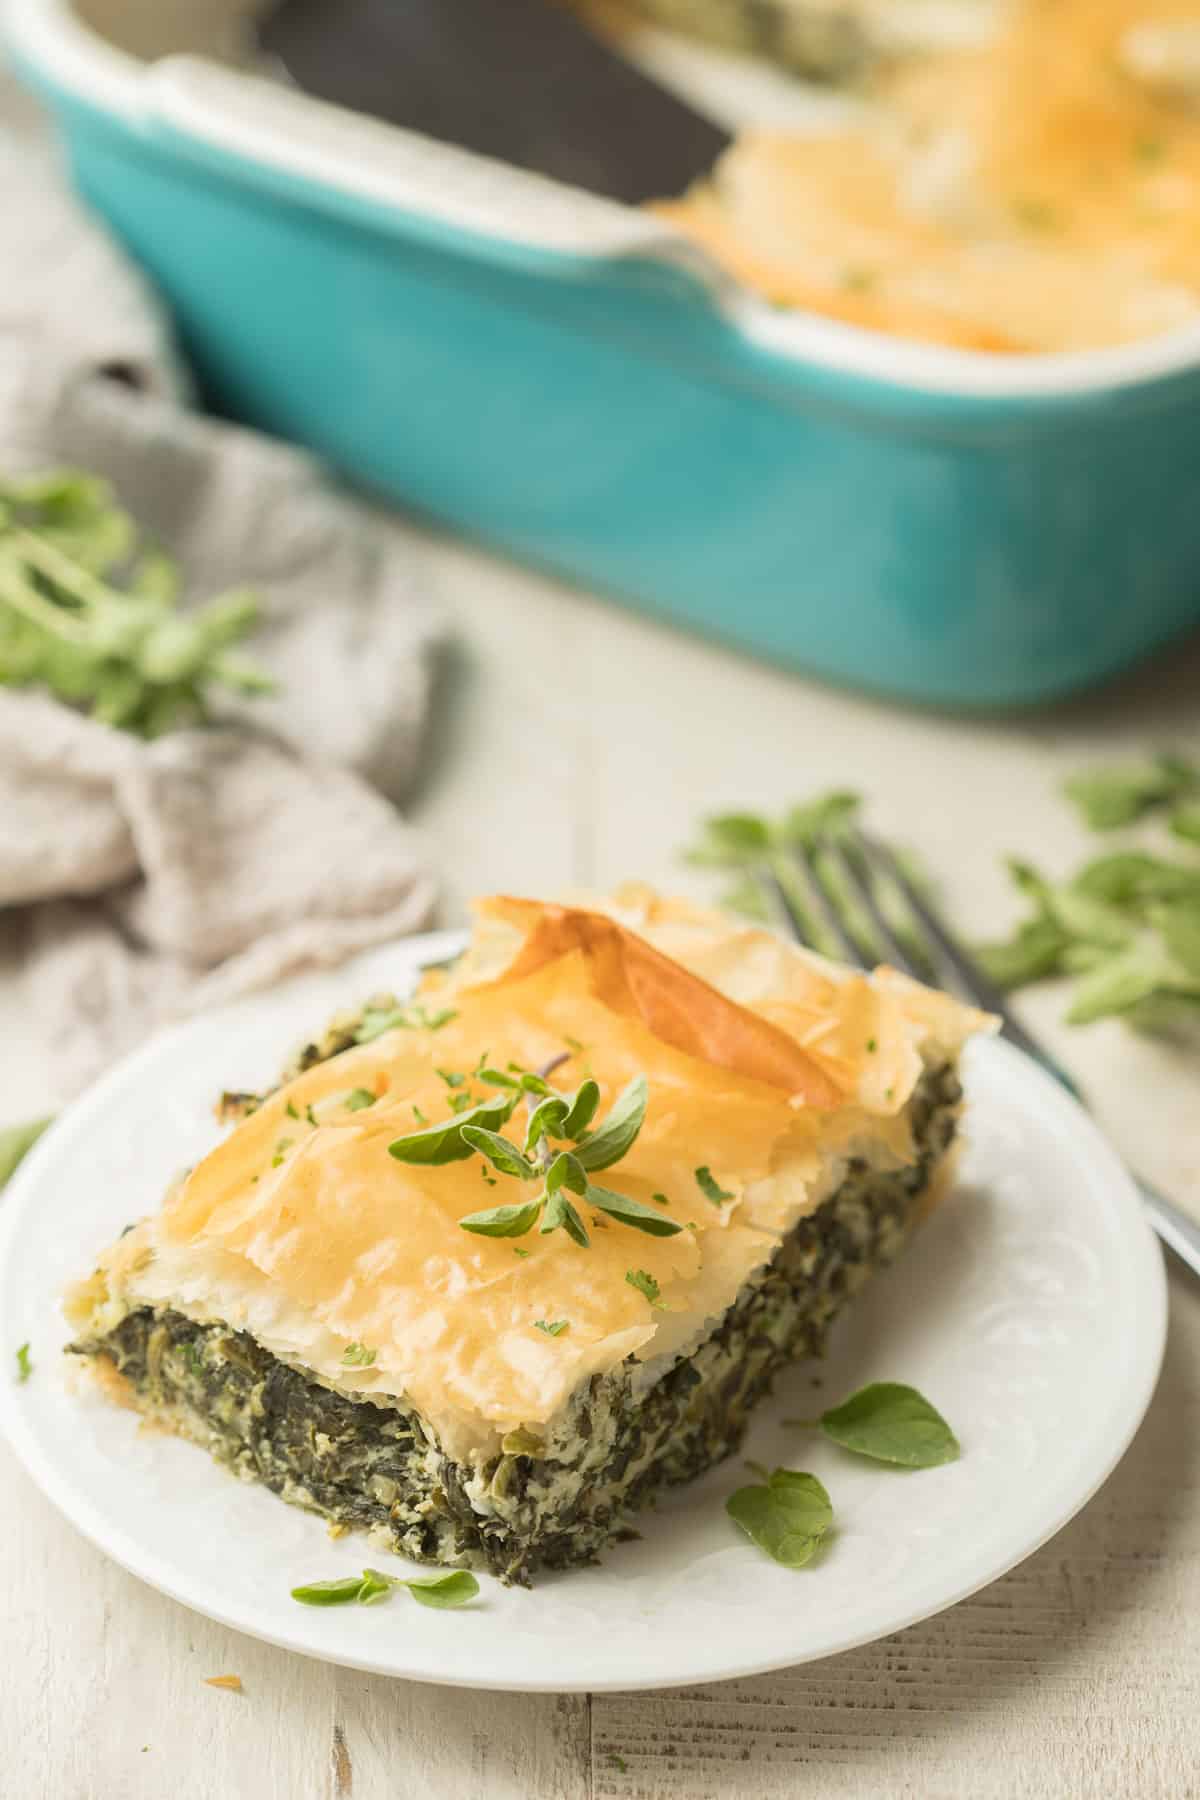 Slice of Vegan Spanakopita on a plate with fork on the side.